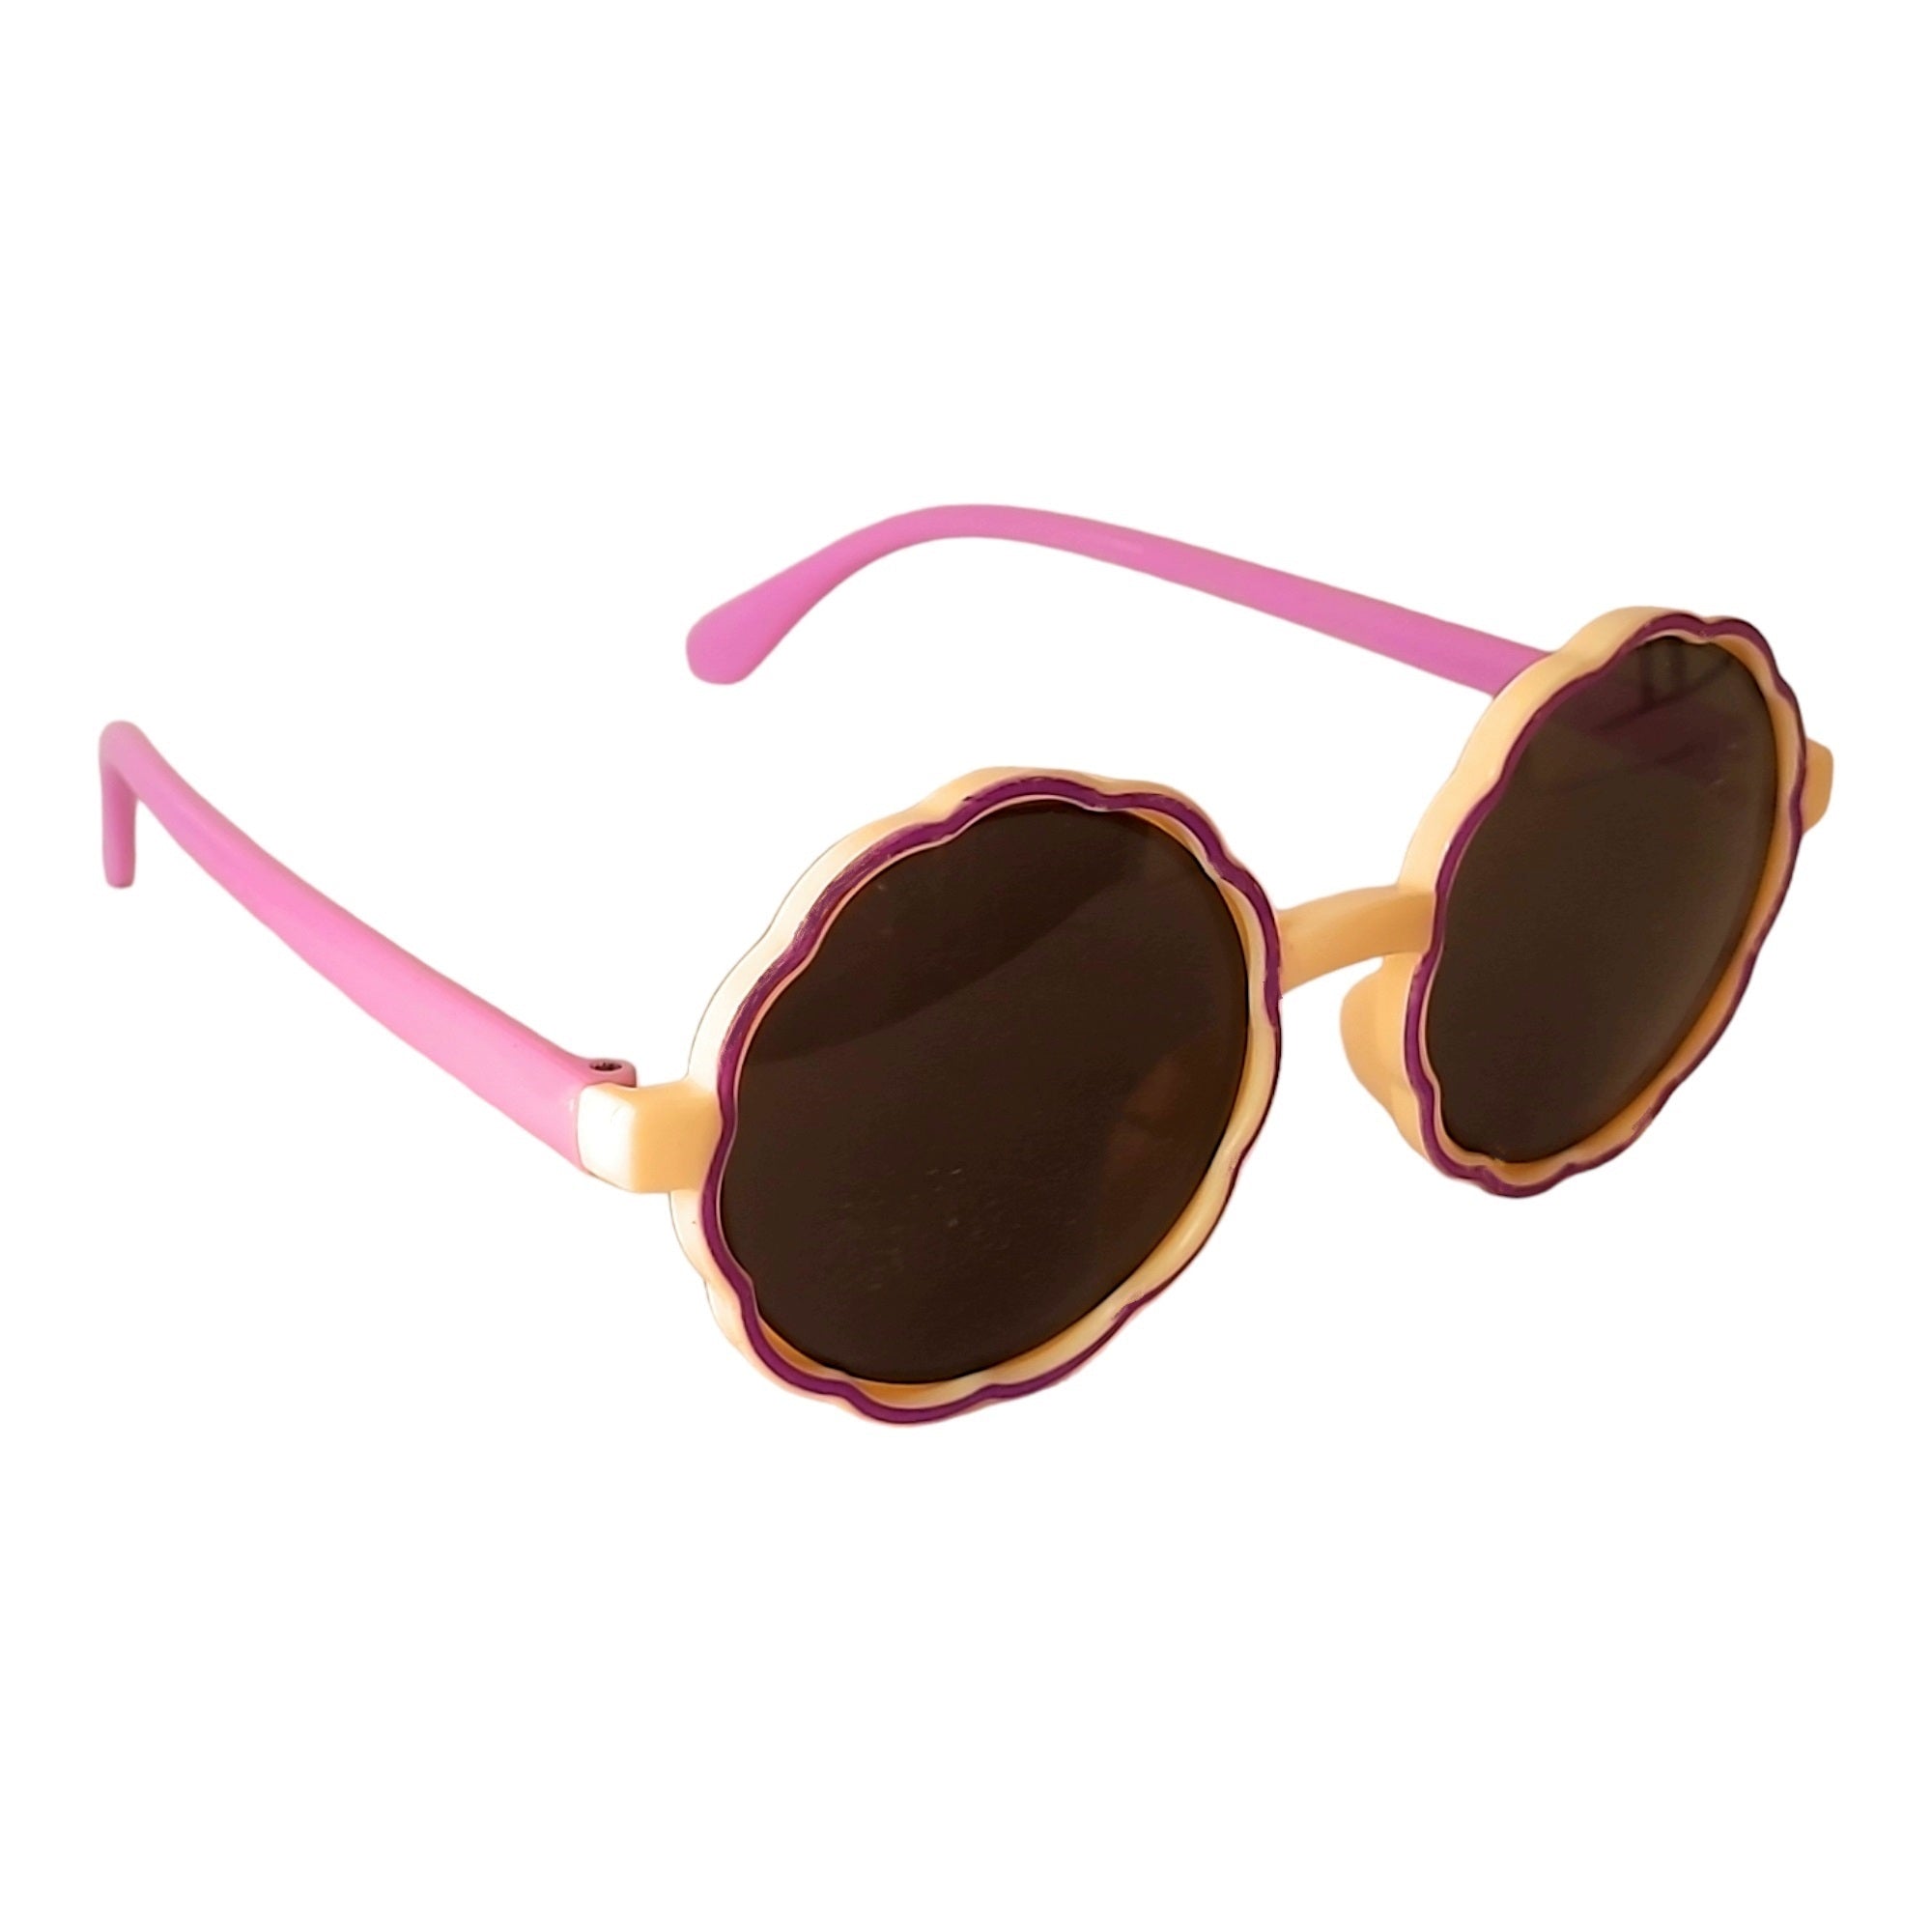 Buy Weewooday 8 Pieces Boy's and Girl's Cute Round Flower Shaped Sunglasses  Accessories at Amazon.in